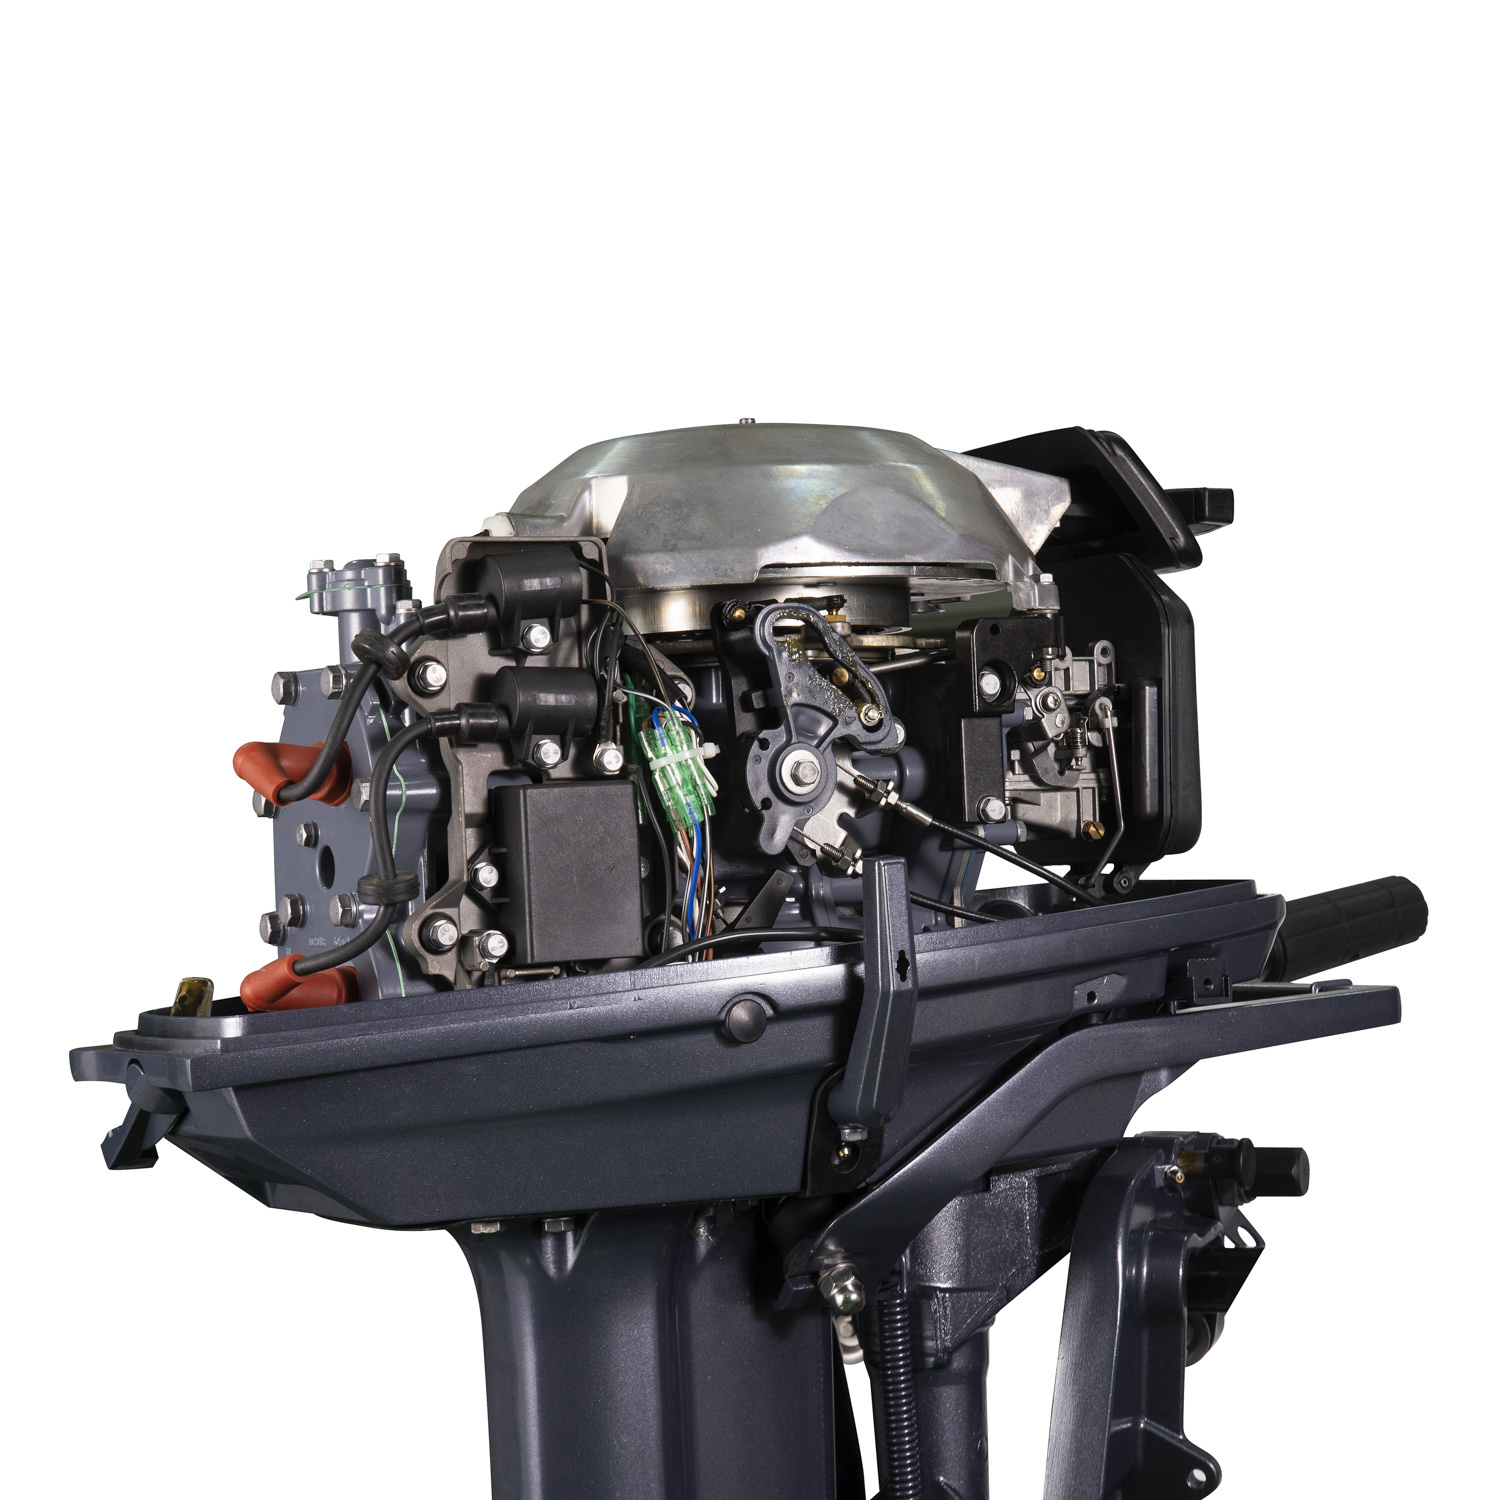 Yamarine 25/30HP Outboard Engine /Motor Replace E25D, E30d, 61n